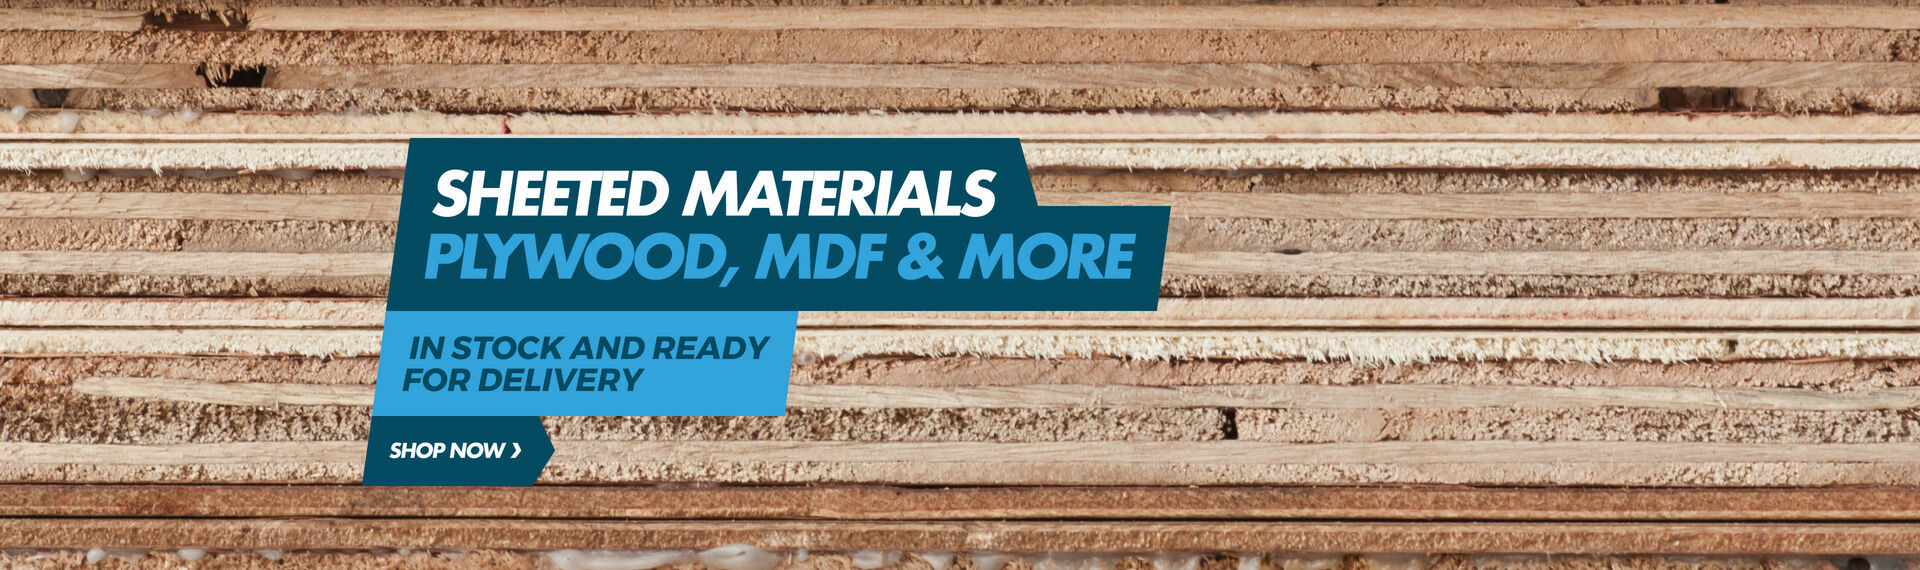 Sheeted Materials